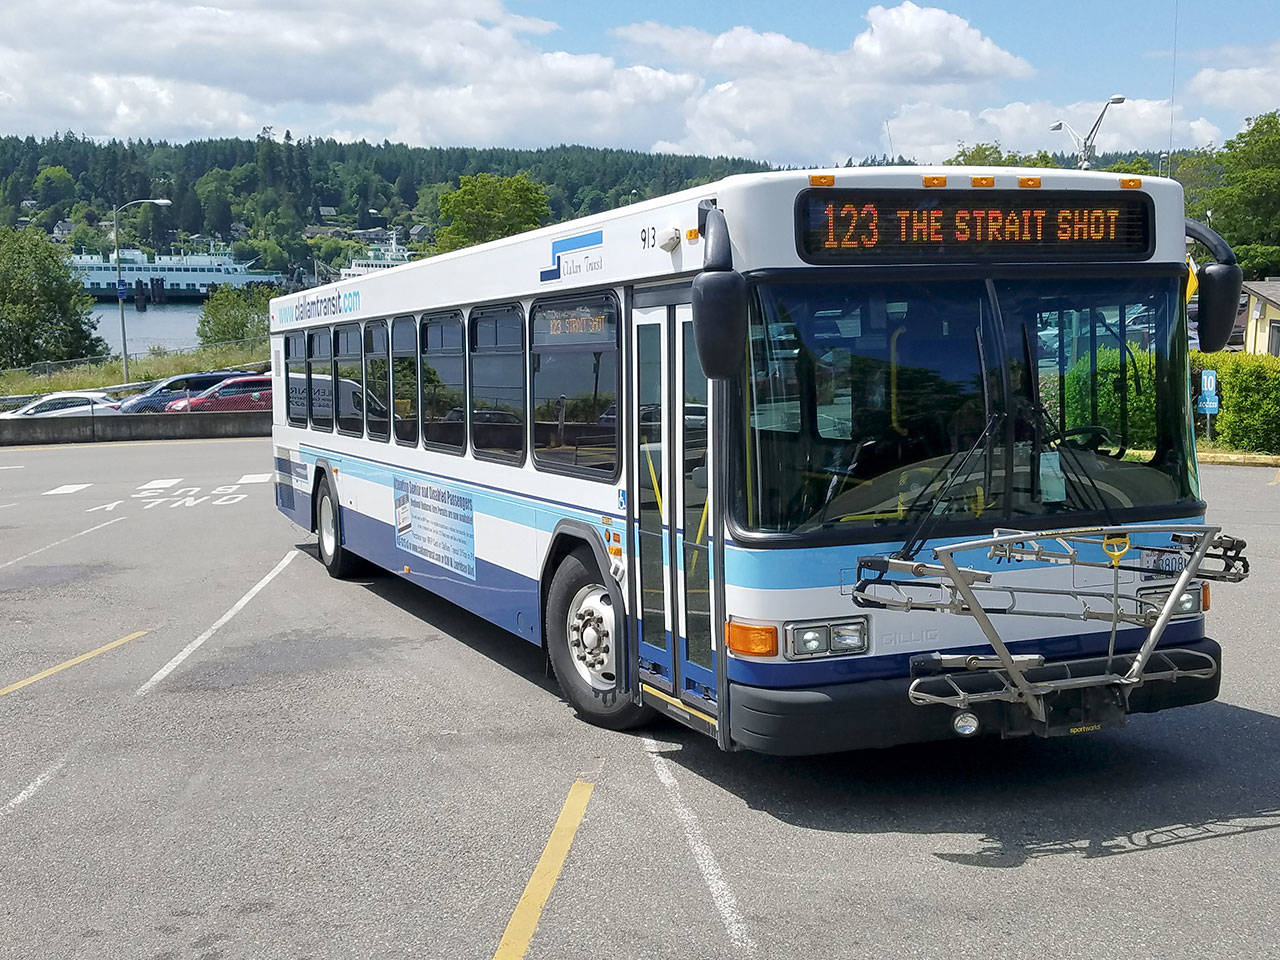 Clallam Transit’s Strait Shot bus service between Port Angeles and Bainbridge Island is seeing a steady increase in ridership. (Clallam Transit)